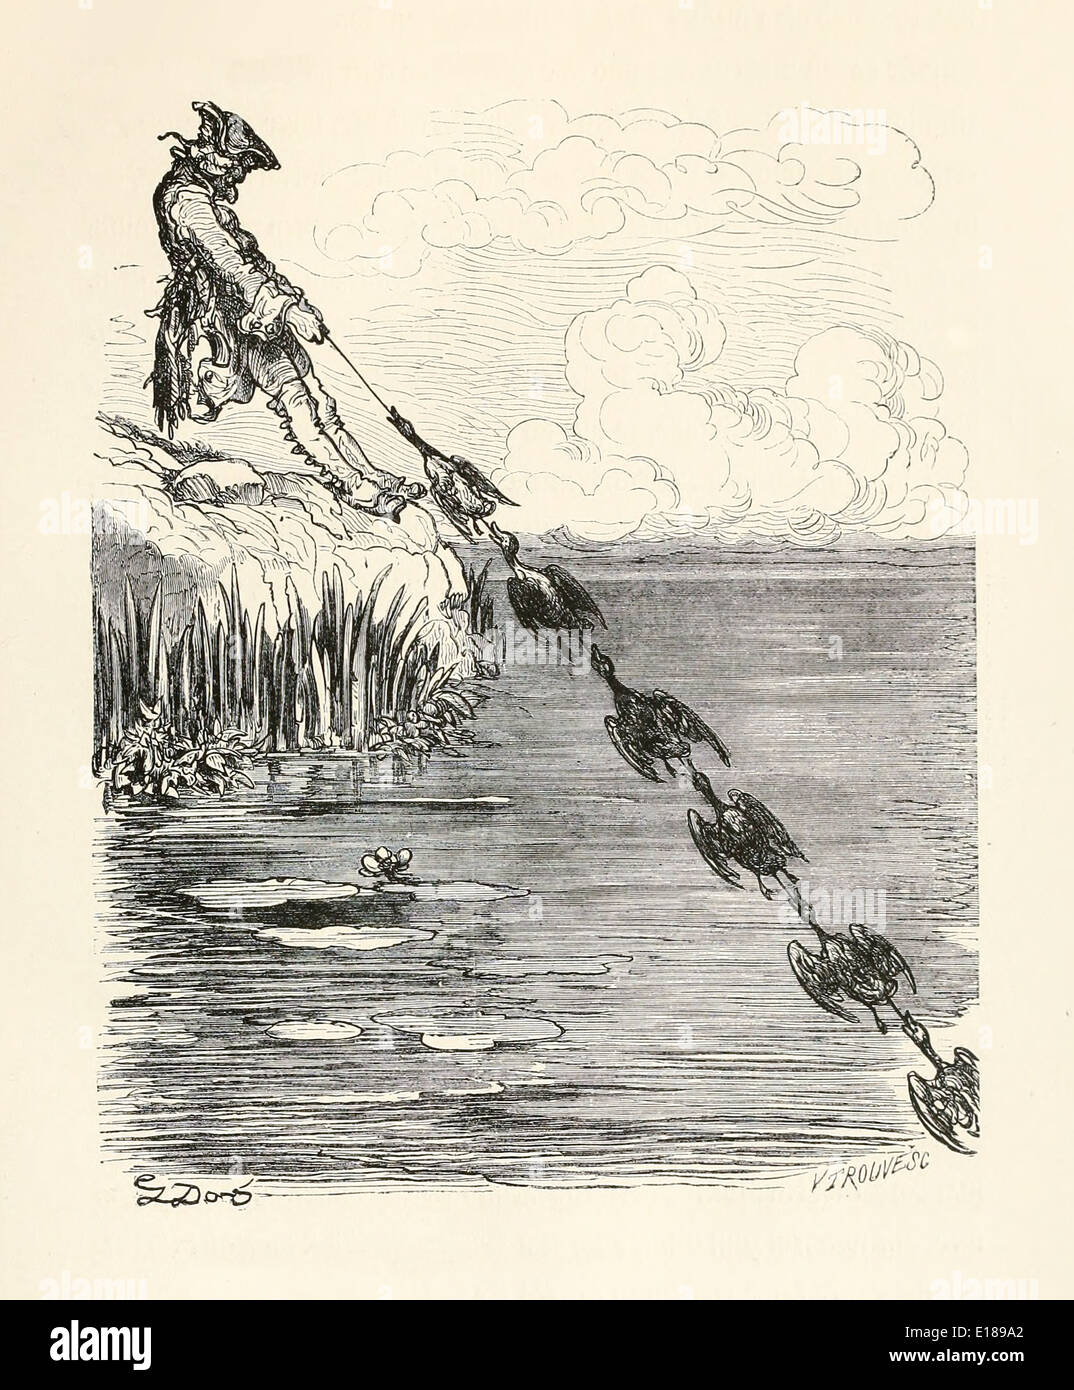 Chapter 2 The Baron catching ducks with bacon fat: "They were strung like pearls". Paul Gustave Doré (1832-1883) Illustration from ‘The Adventures of Baron Munchausen’ by Rudoph Raspe published in 1862. Stock Photo